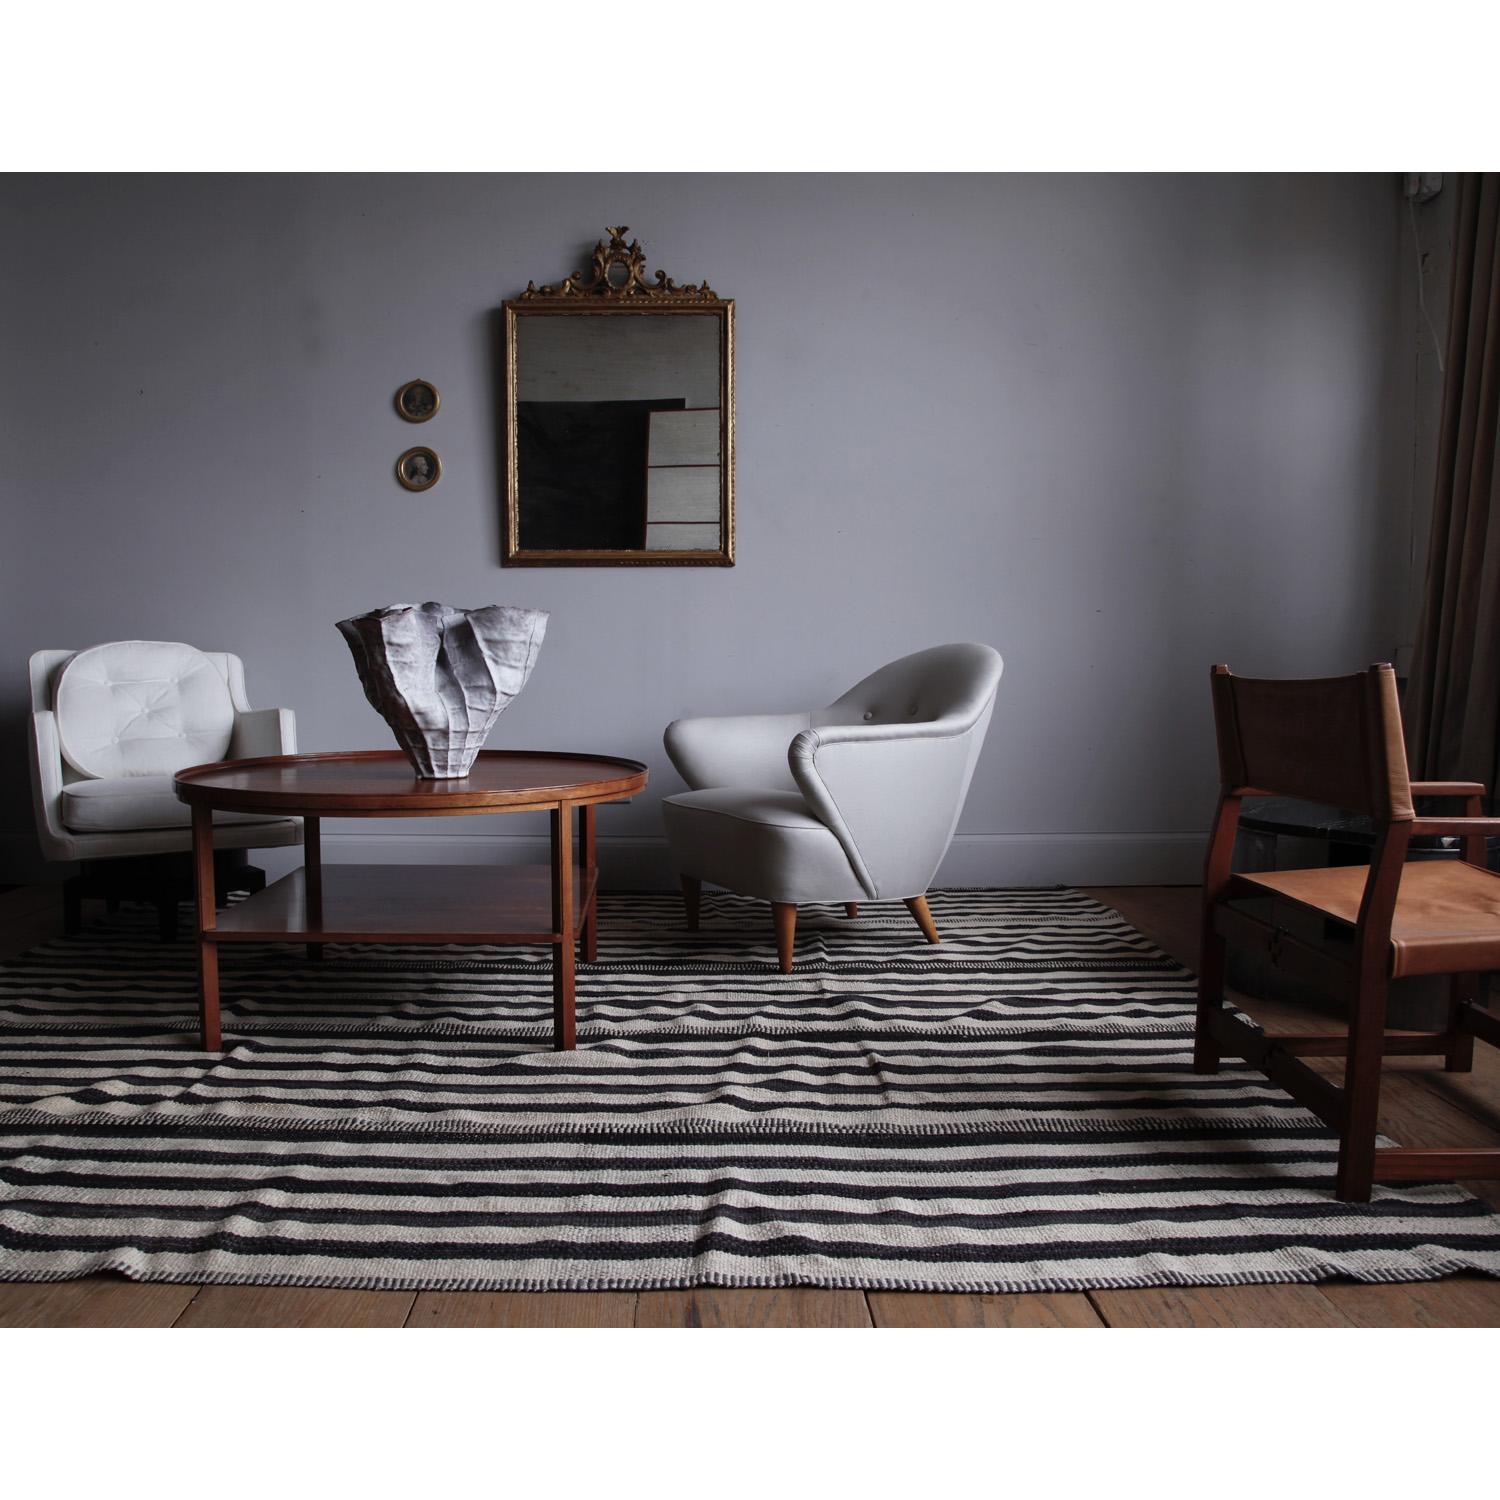 Kaare Klint is commonly considered the father of modern Danish furniture. Klint carefully researched his designs, basing them on functionality, human proportions, craftsmanship, and materials and techniques of the highest quality. As a result of the